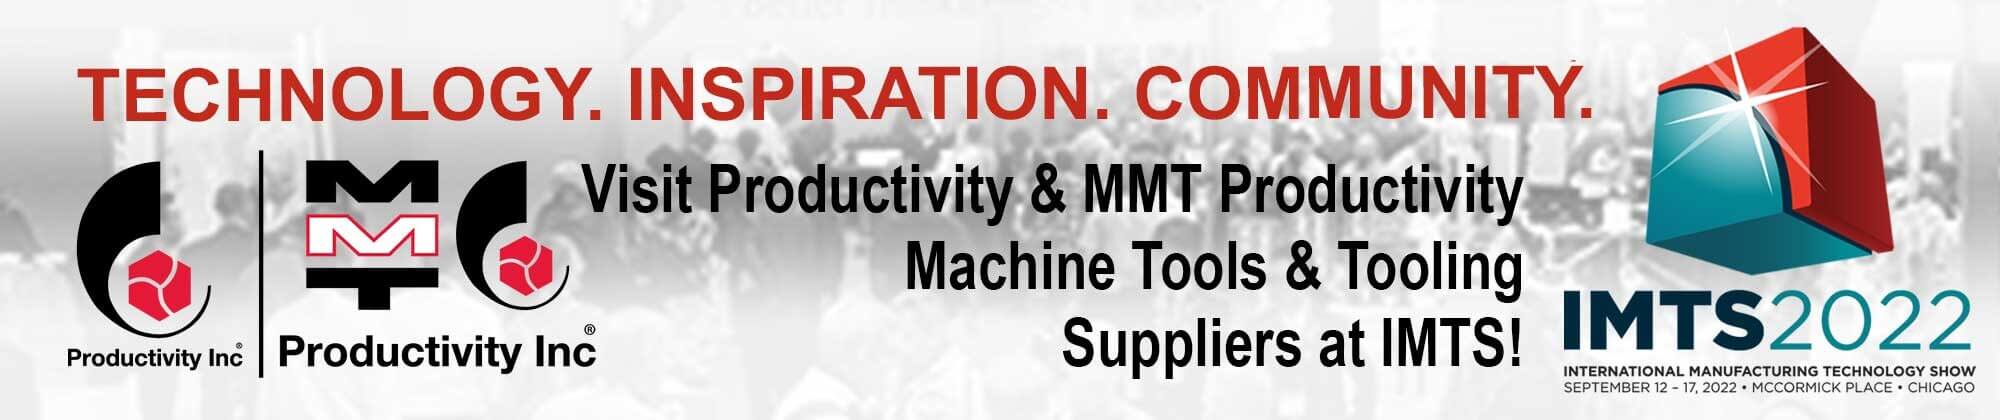 Productivity & MMT Productivity Suppliers at IMTS 2022